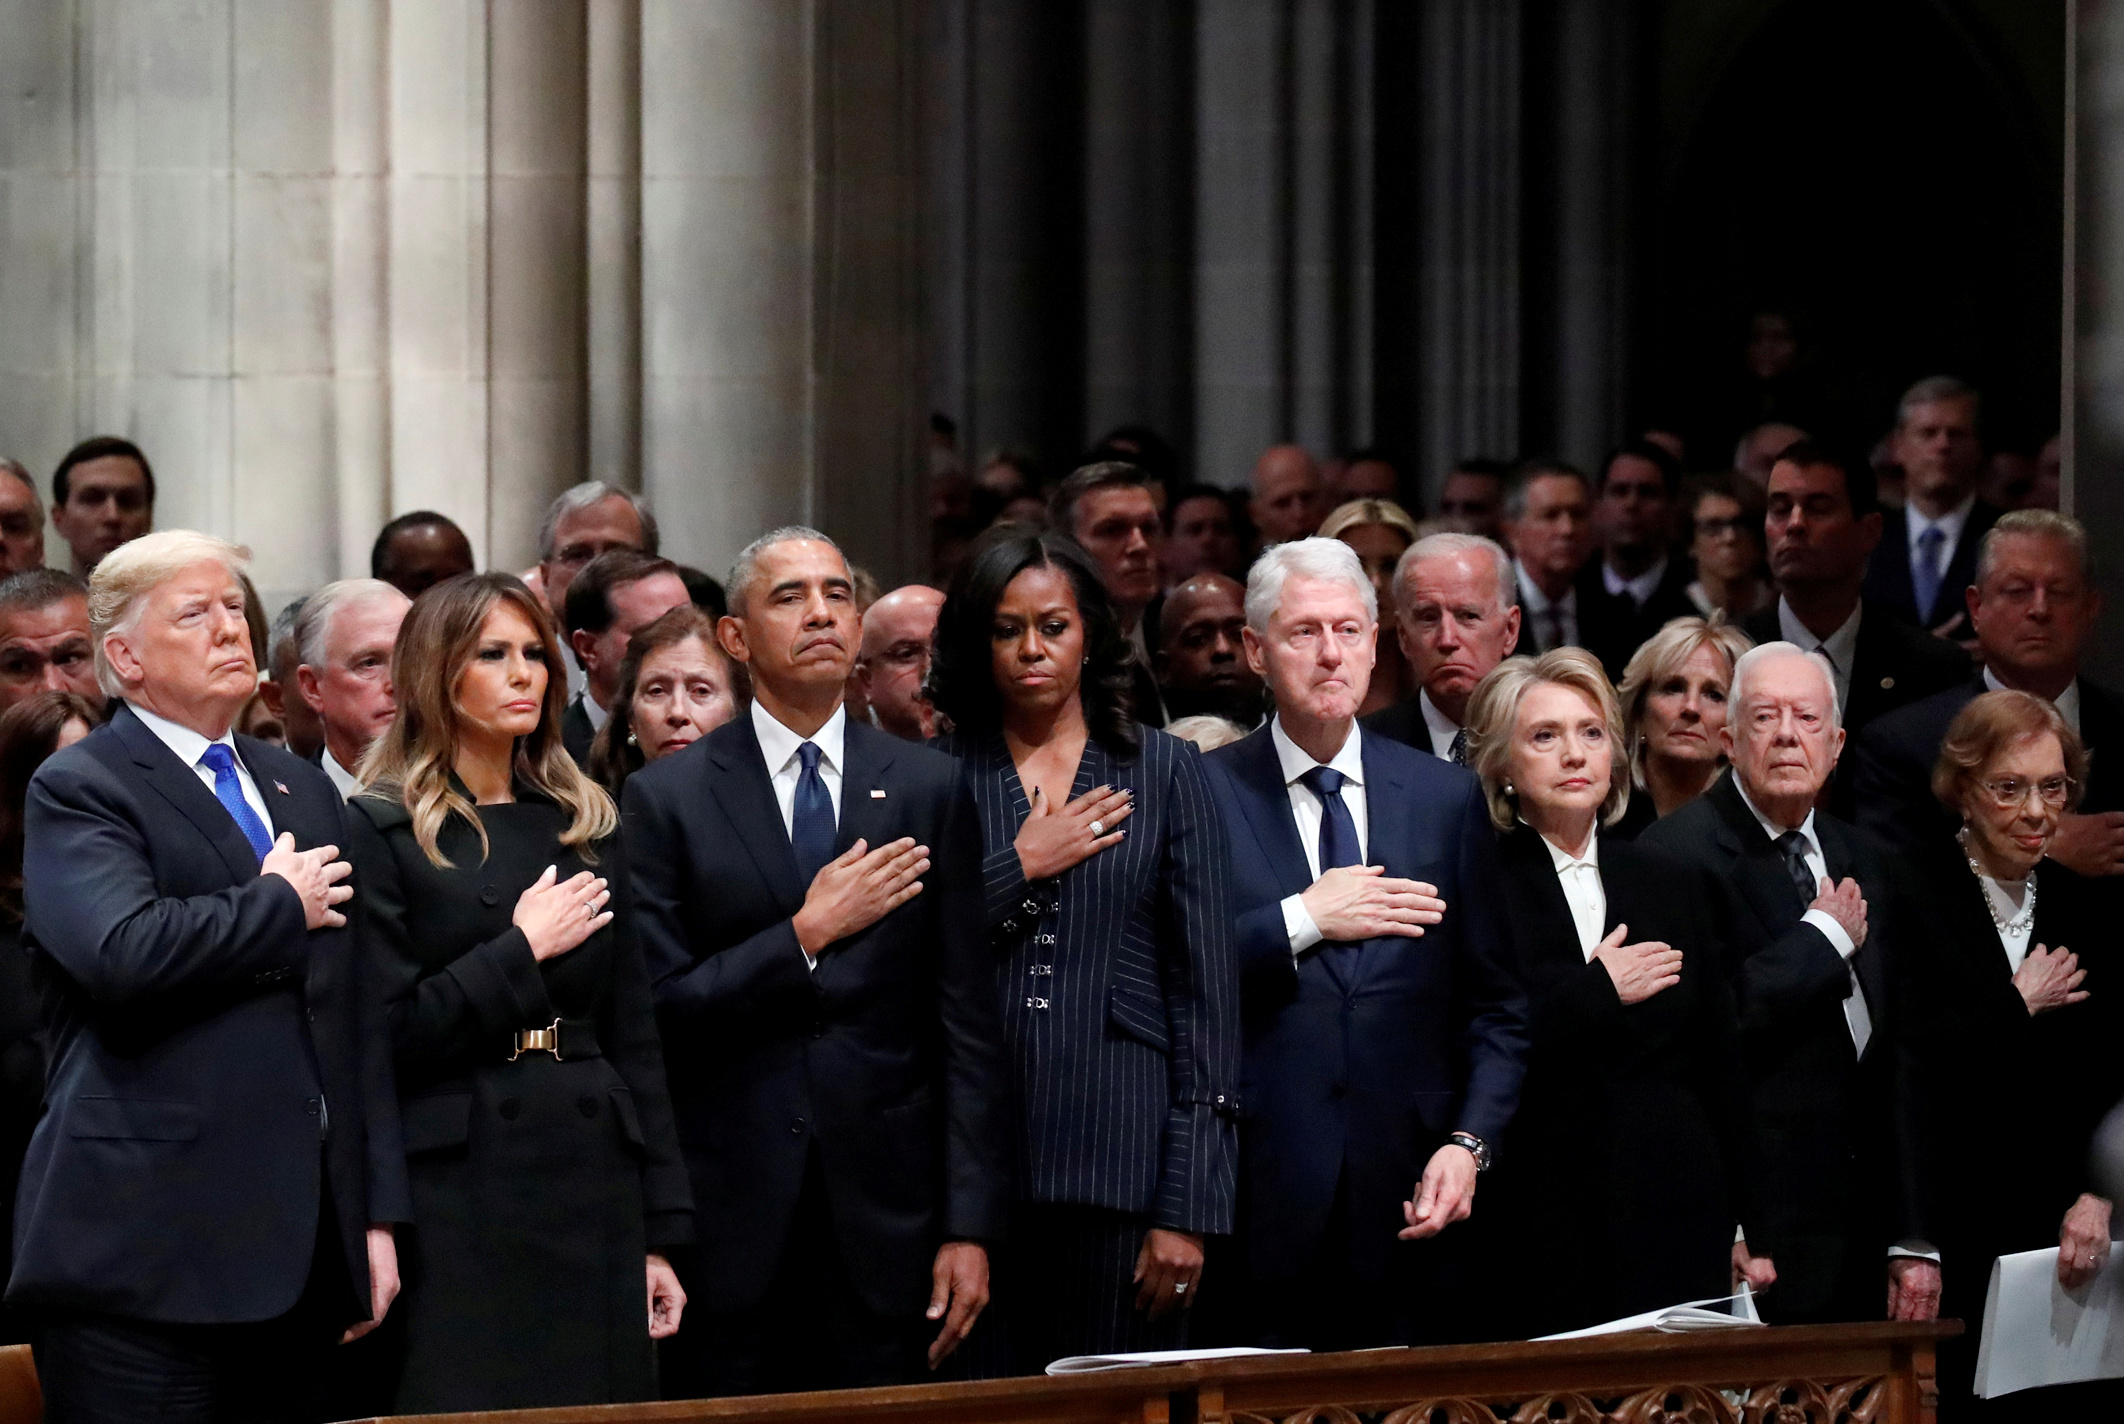 U.S. President Donald Trump, first lady Melania Trump, former President Barack Obama, former first lady Michelle Obama, former President Bill Clinton, former Secretary of State Hillary Clinton, former President Jimmy Carter and former first lady Rosalynn Carter participate in the State Funeral for former President George H.W. Bush, at the National Cathedral, Wednesday, Dec. 5, 2018 in Washington. Alex Brandon/Pool via REUTERS